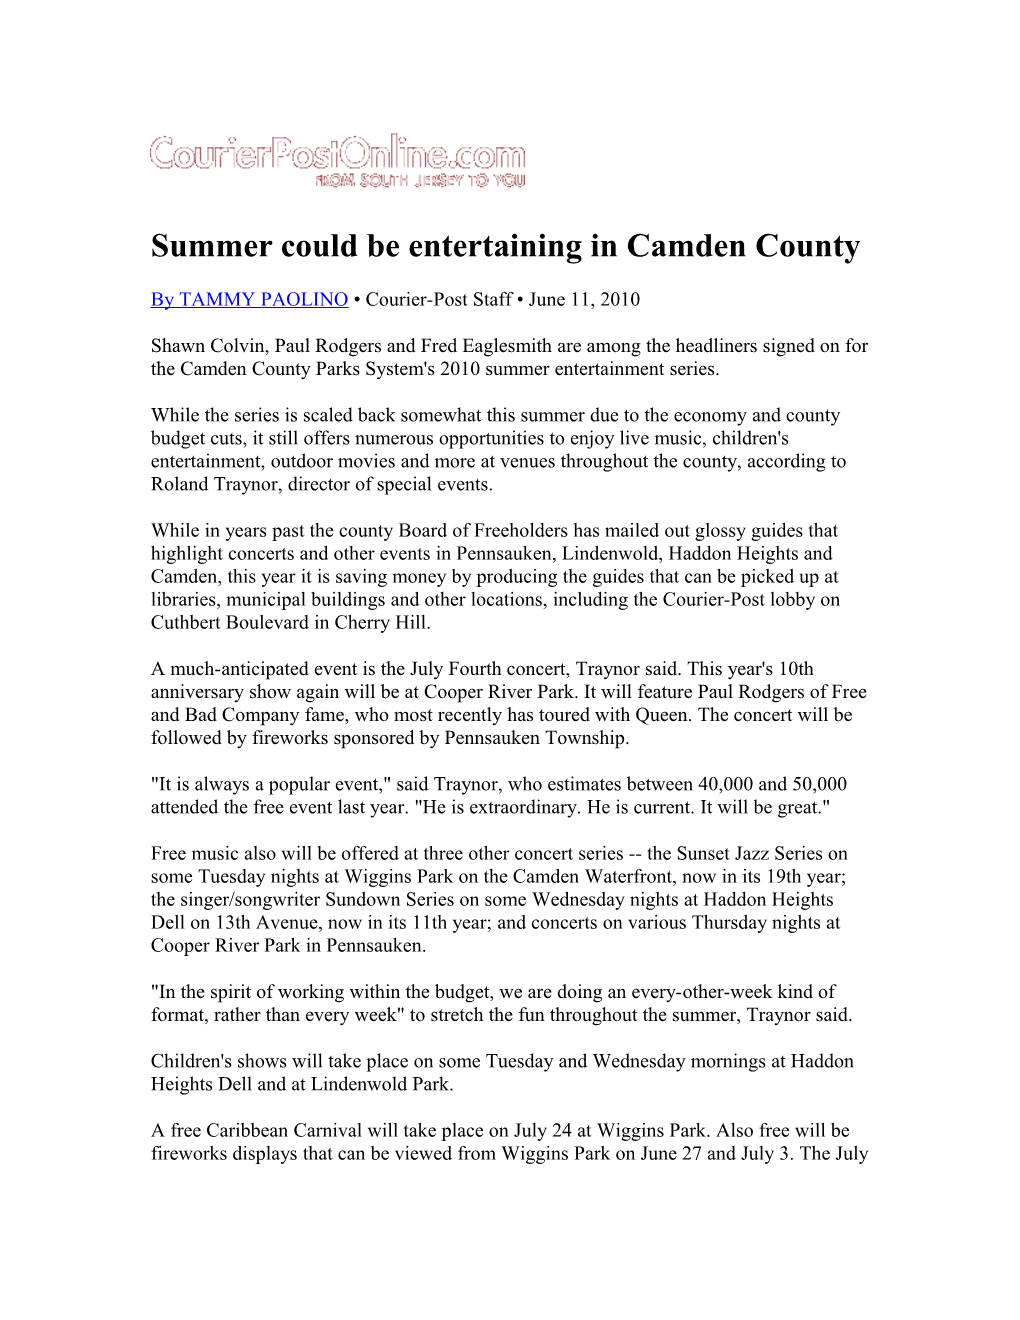 Summer Could Be Entertaining in Camden County